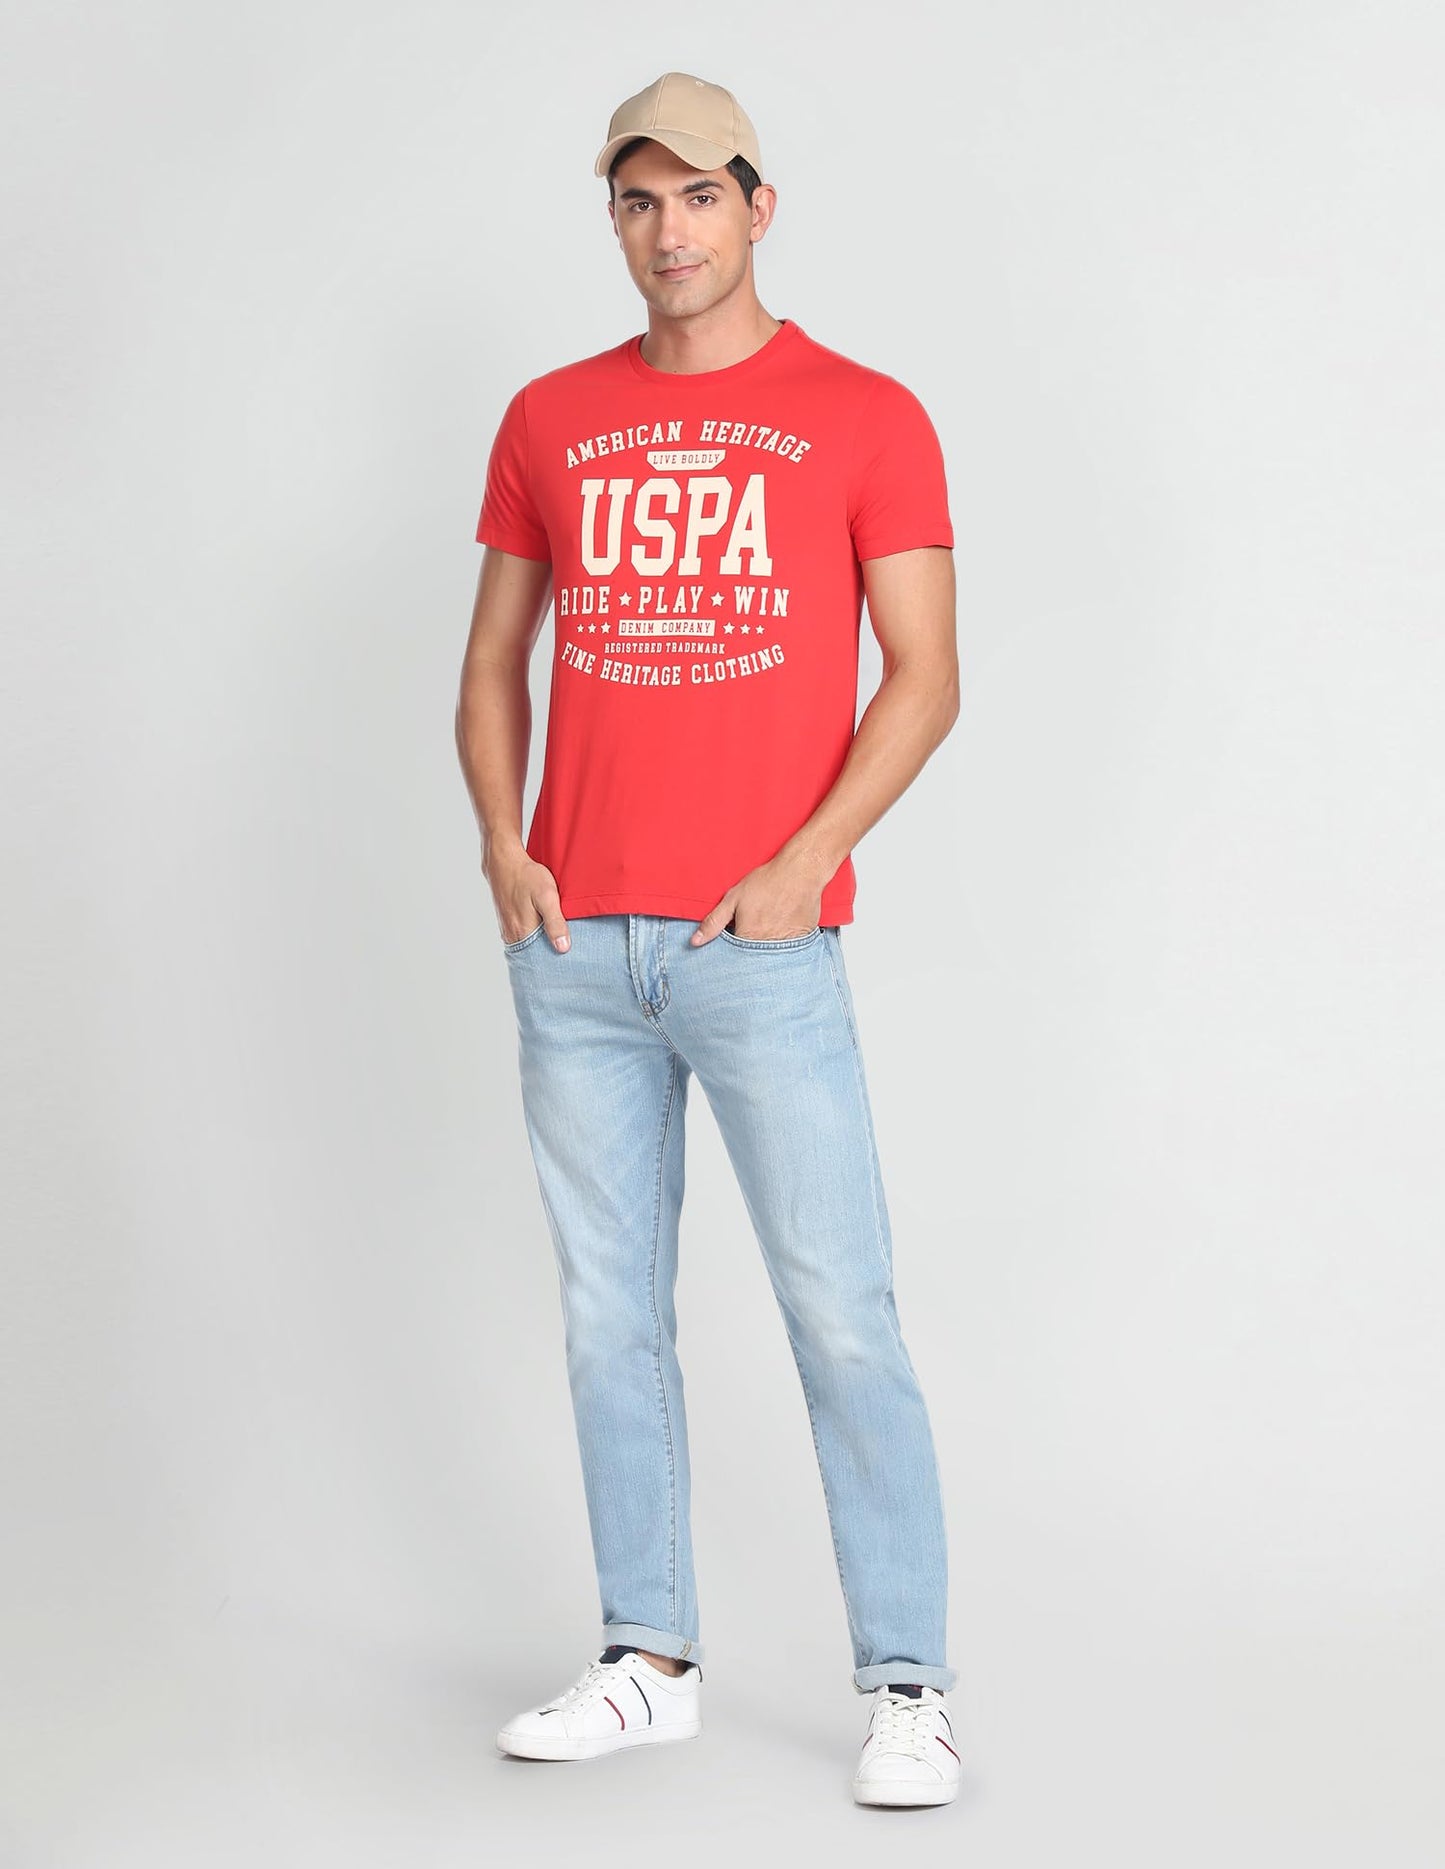 U.S. POLO ASSN. Mens Muscle FIT Half Sleeve Round Neck T-Shirts (UDTSHS0417_RED_L)